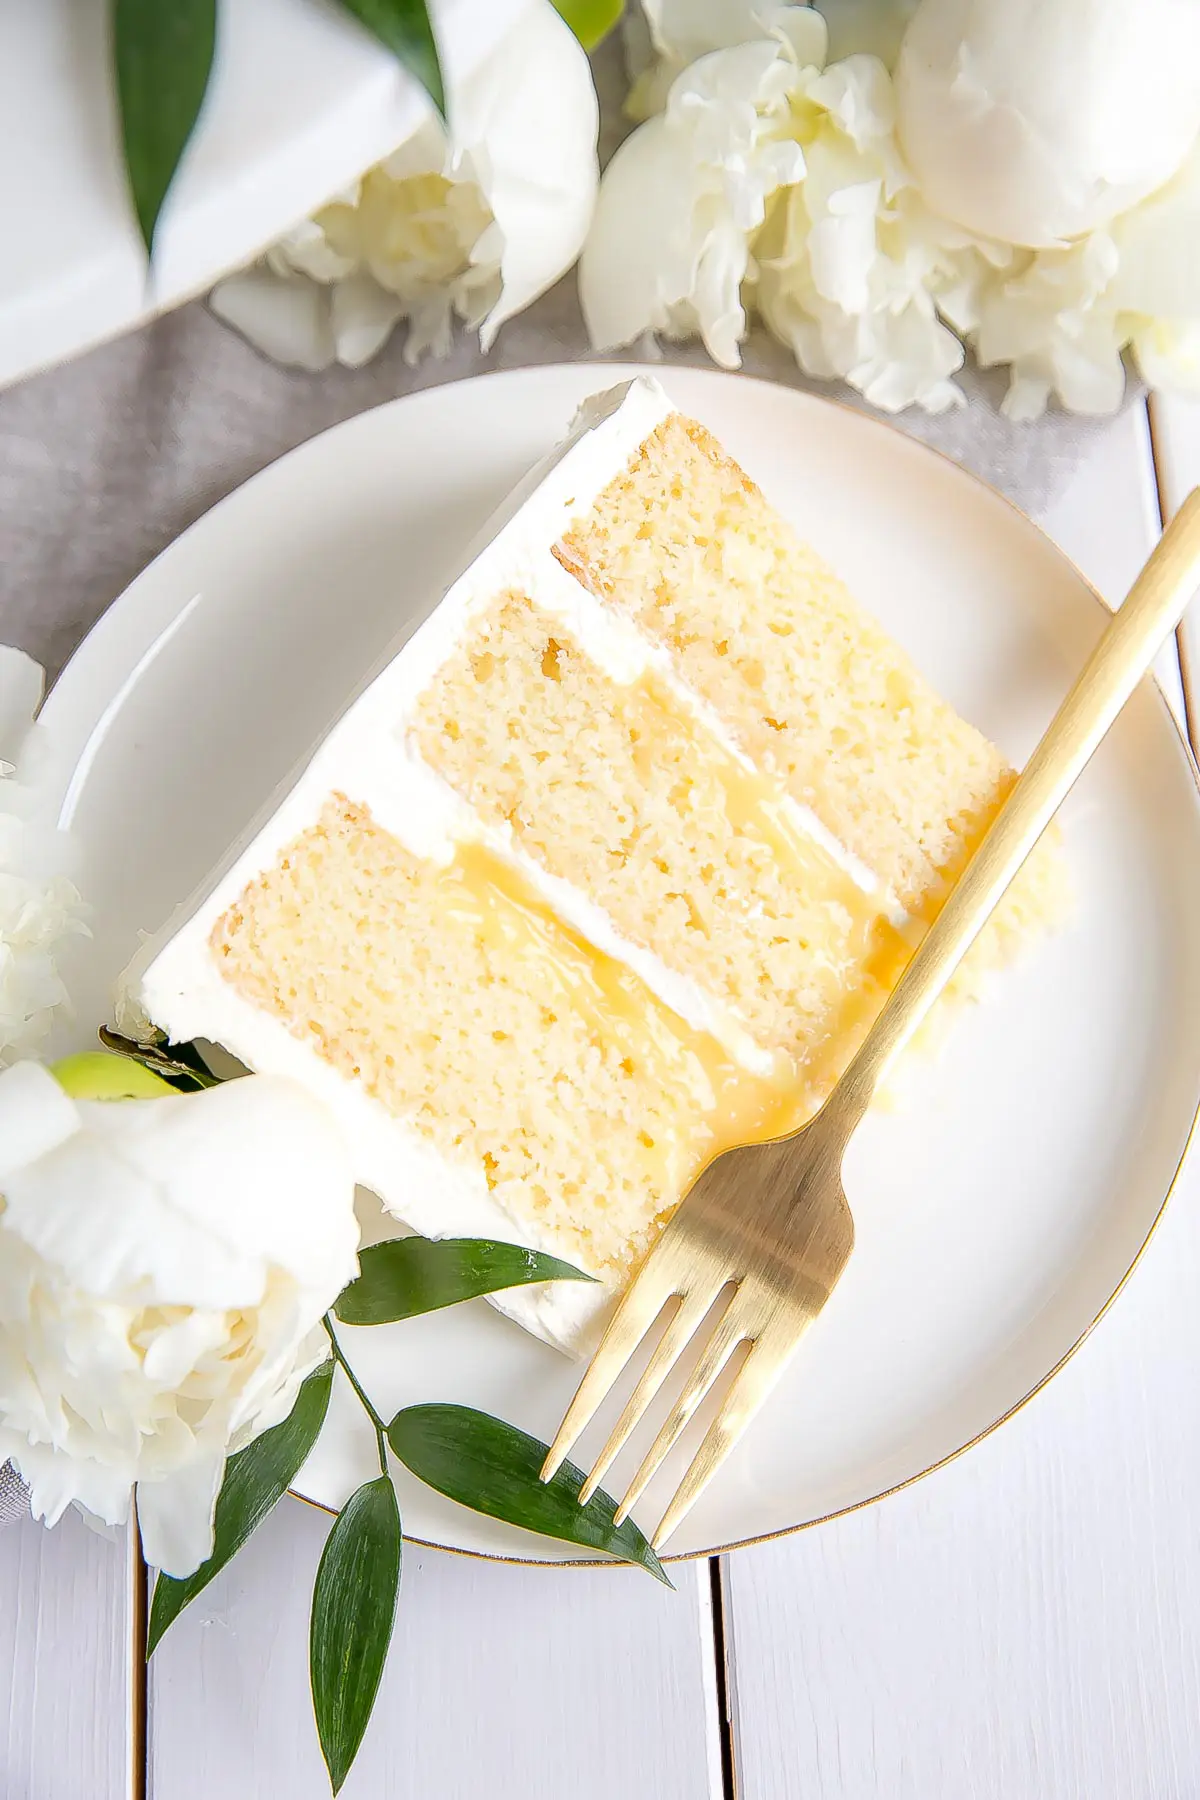 A slice of cake with lemon curd filling